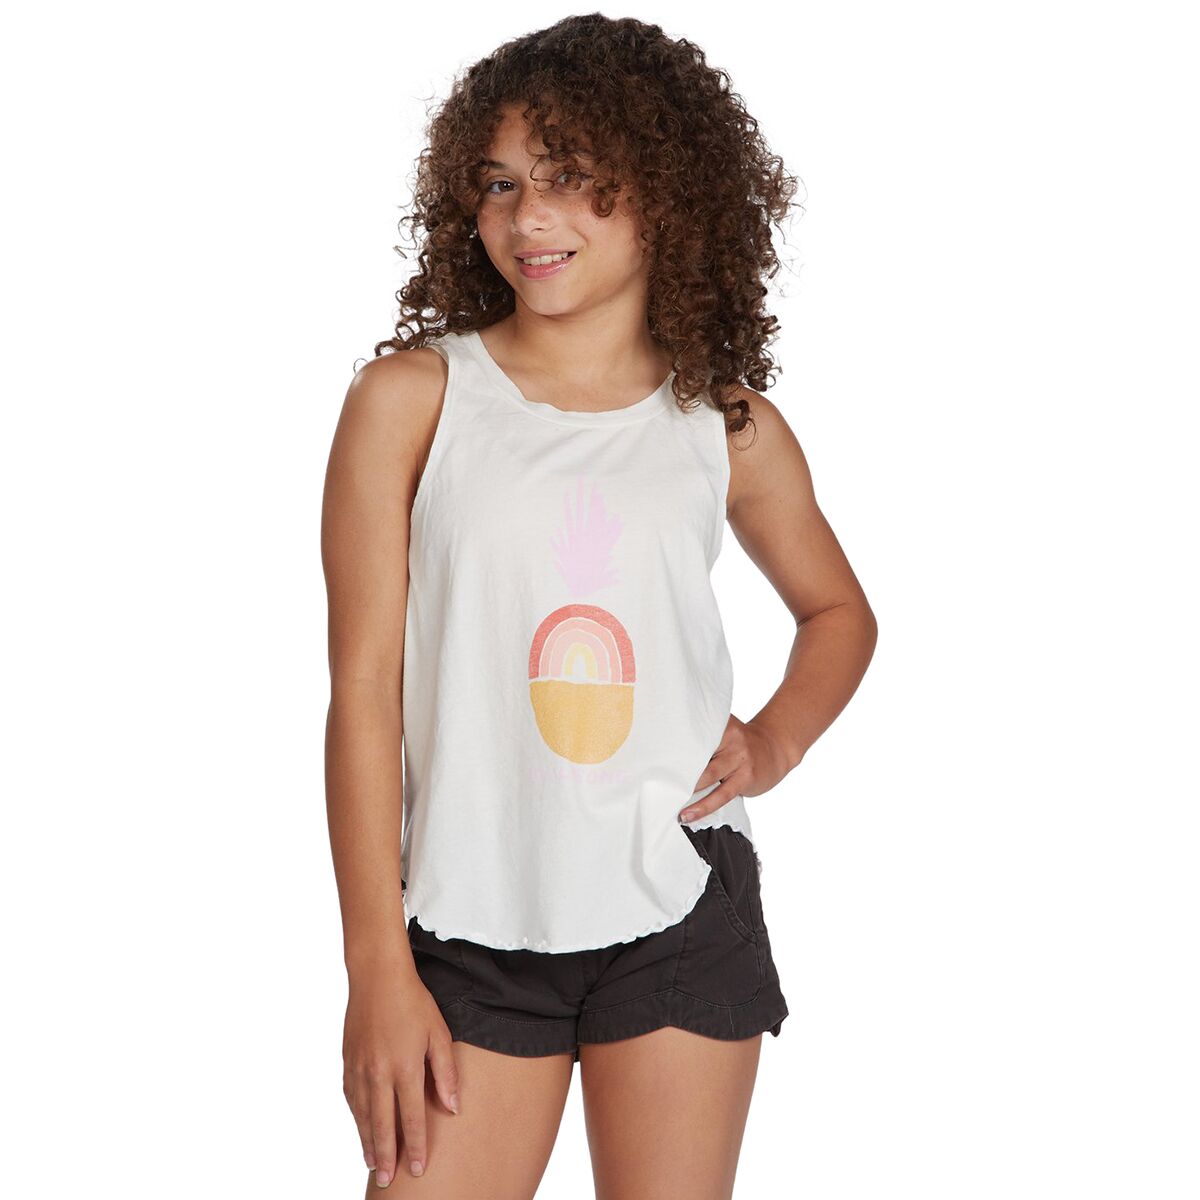 Billabong Meant To Be Tank Top - Girls'